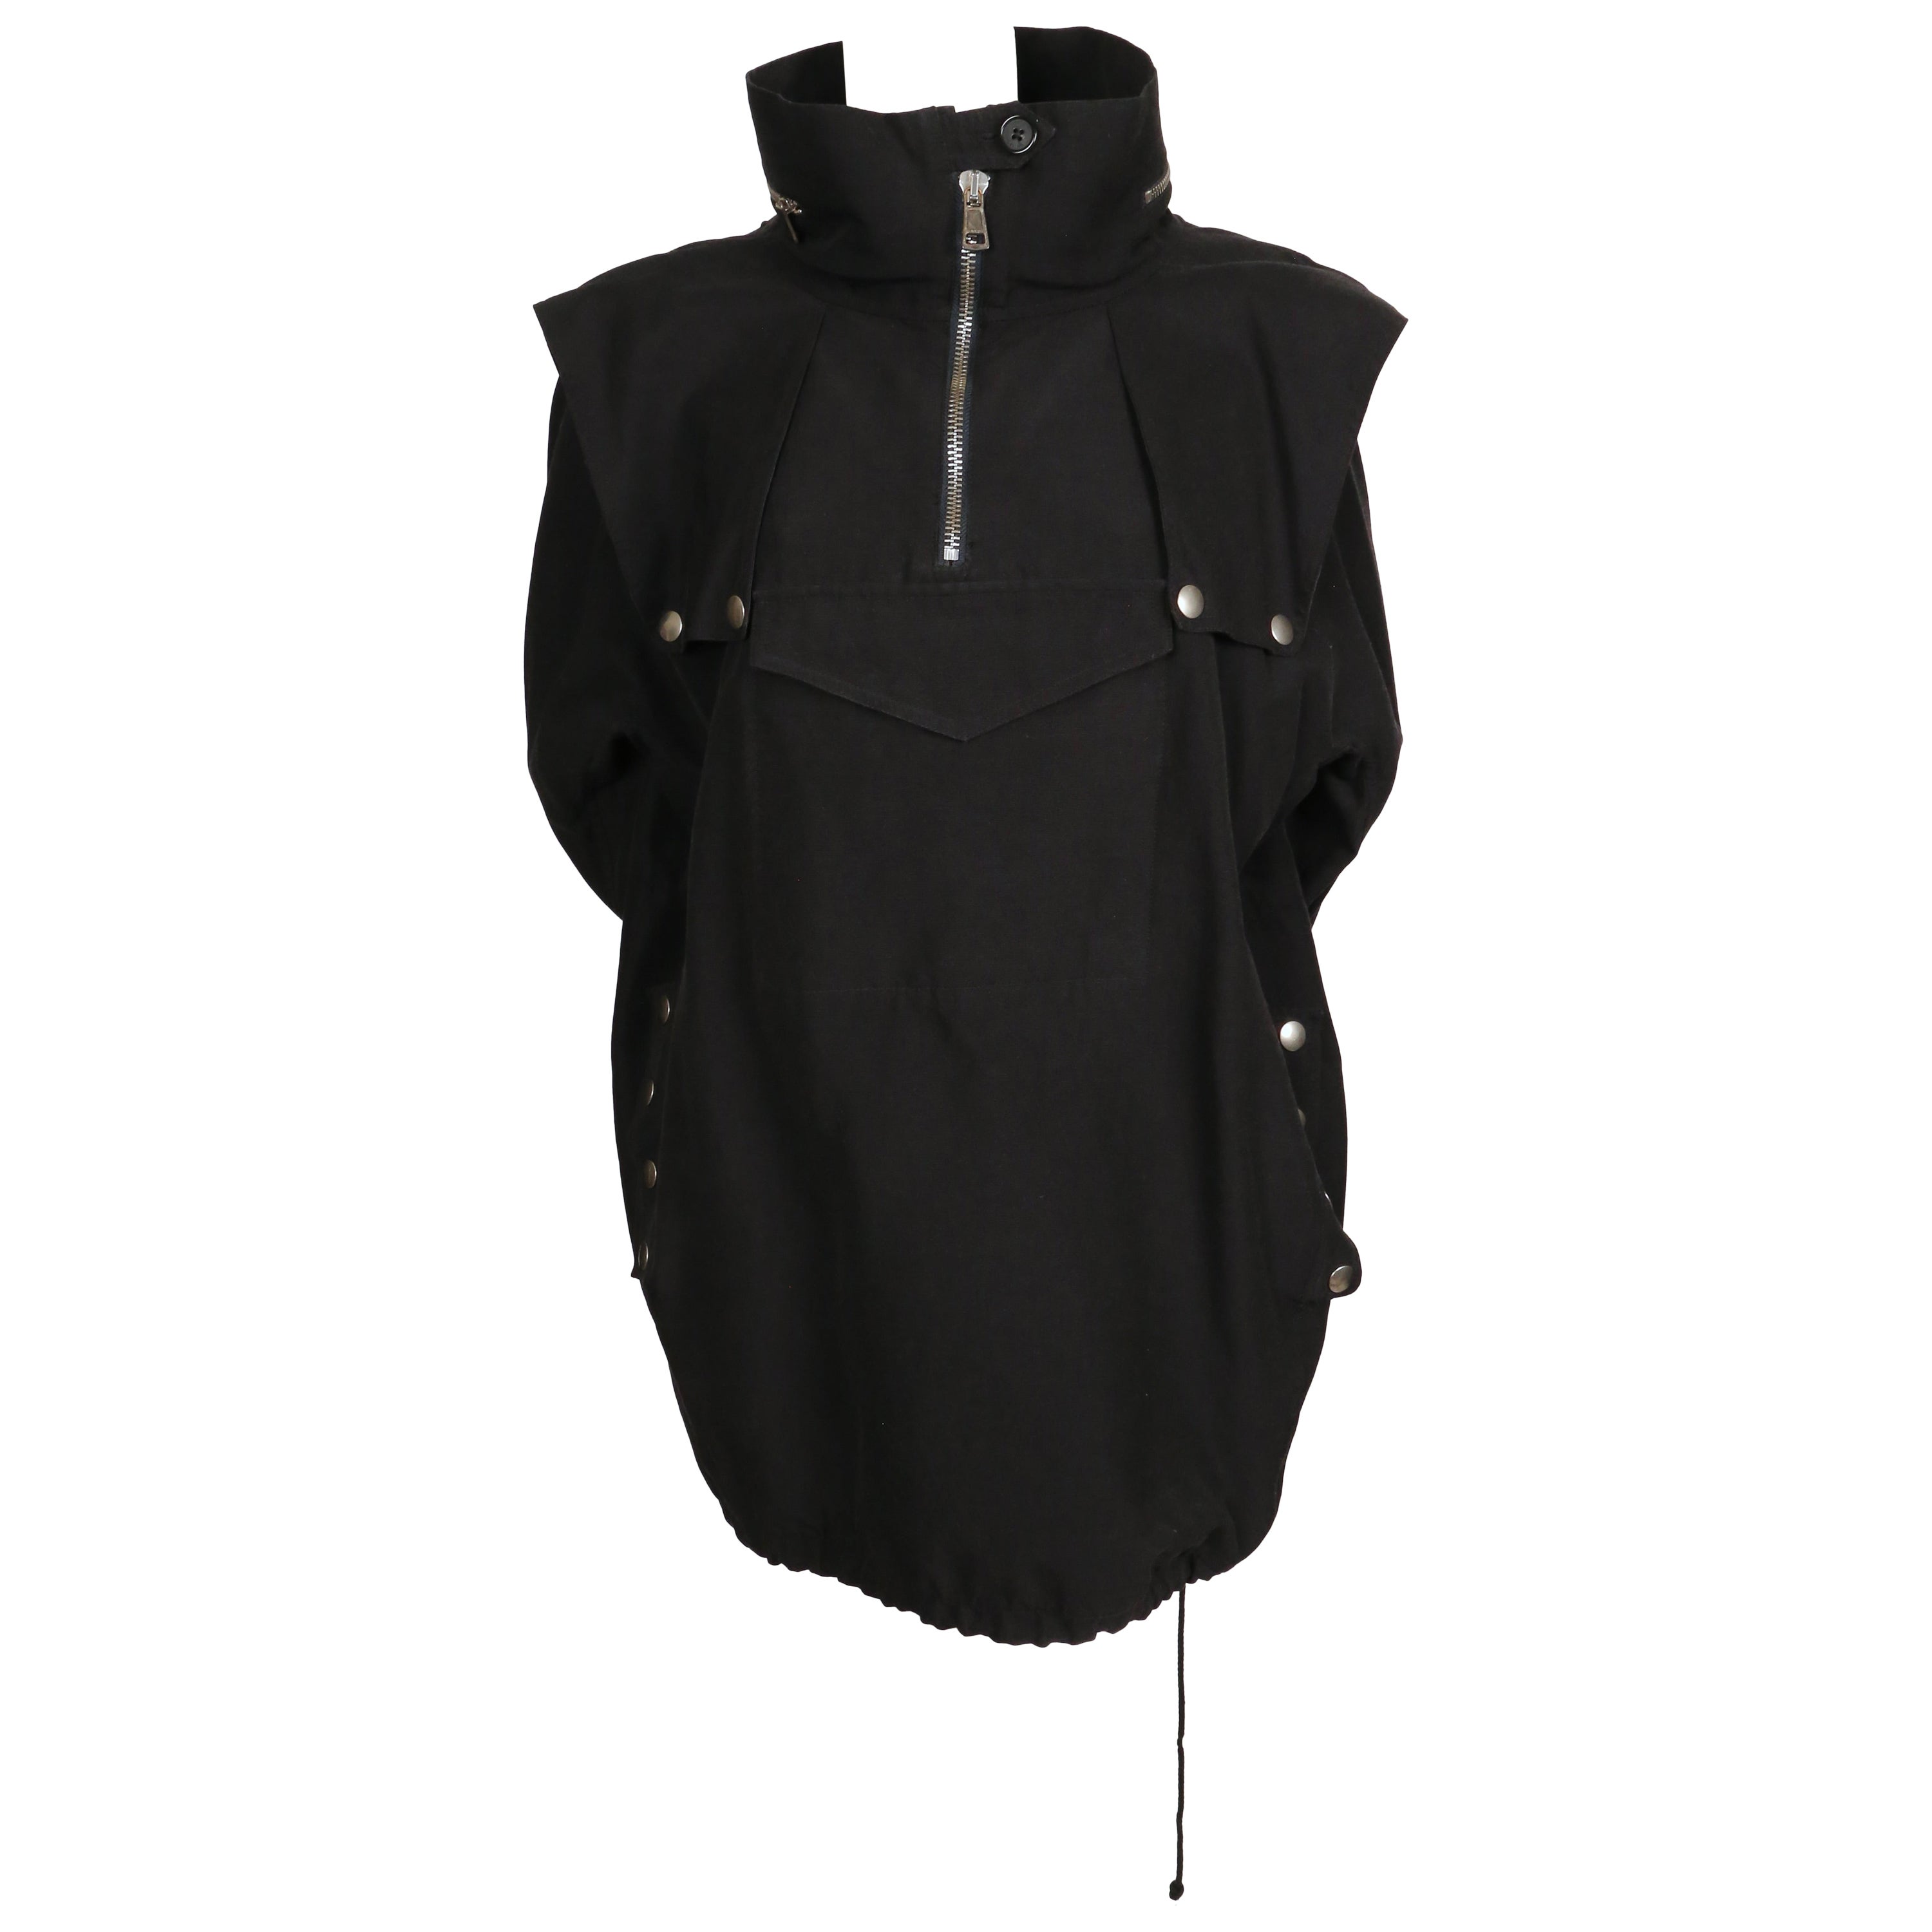 2011 Celine By PHOEBE PHILO deep navy blue anorak jacket in cotton For Sale